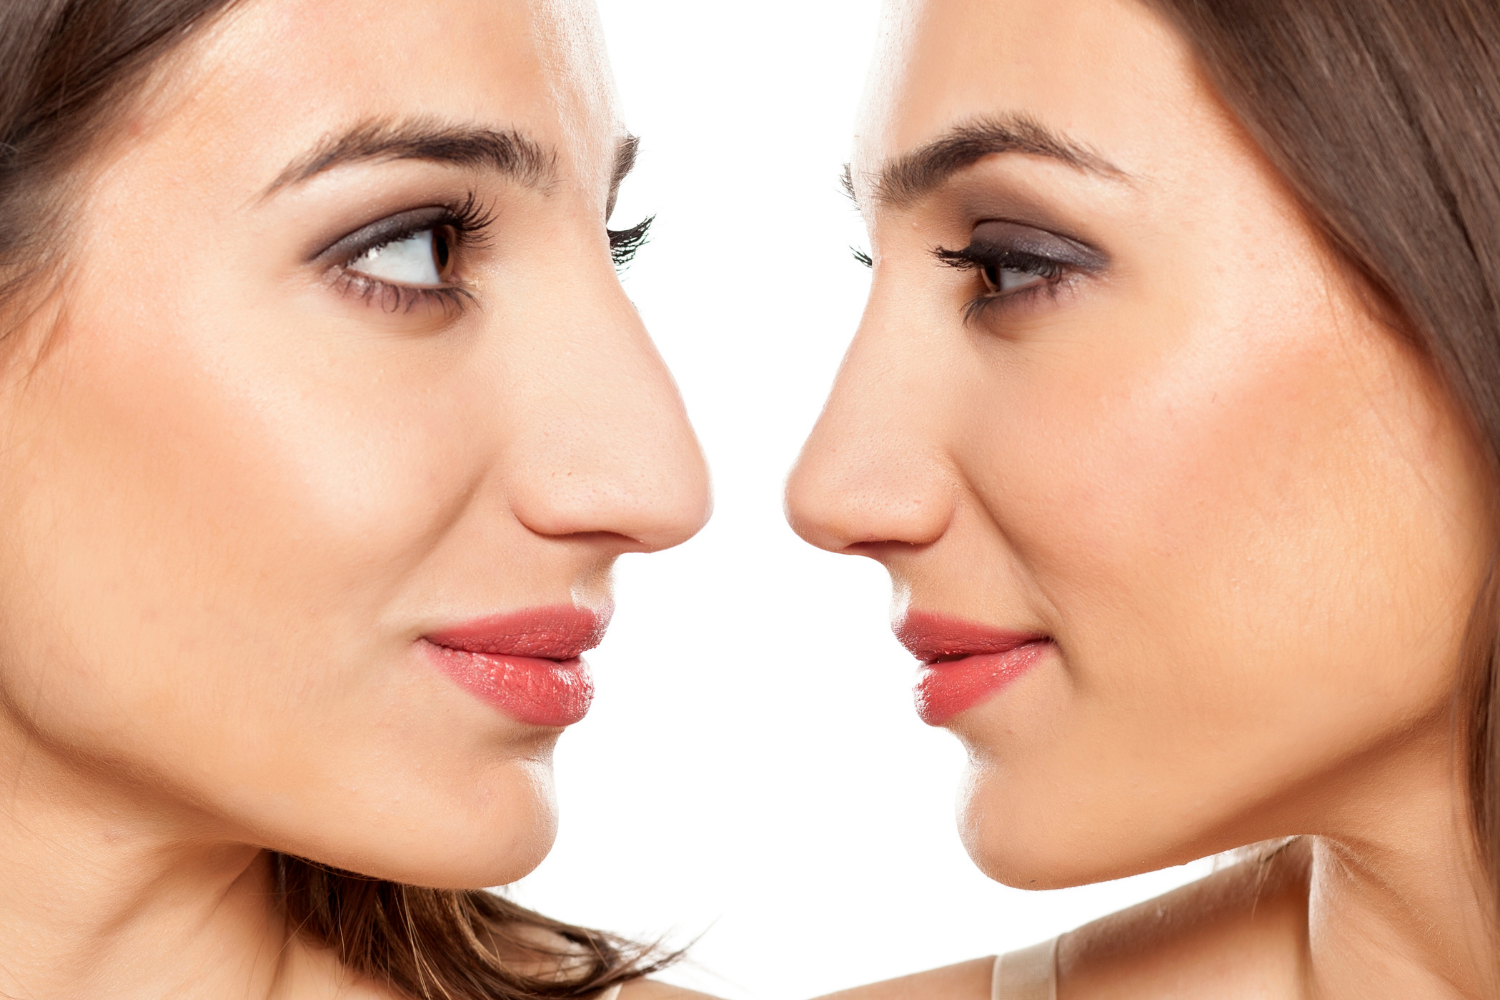 Rhinoplasty Surgery before and after pics